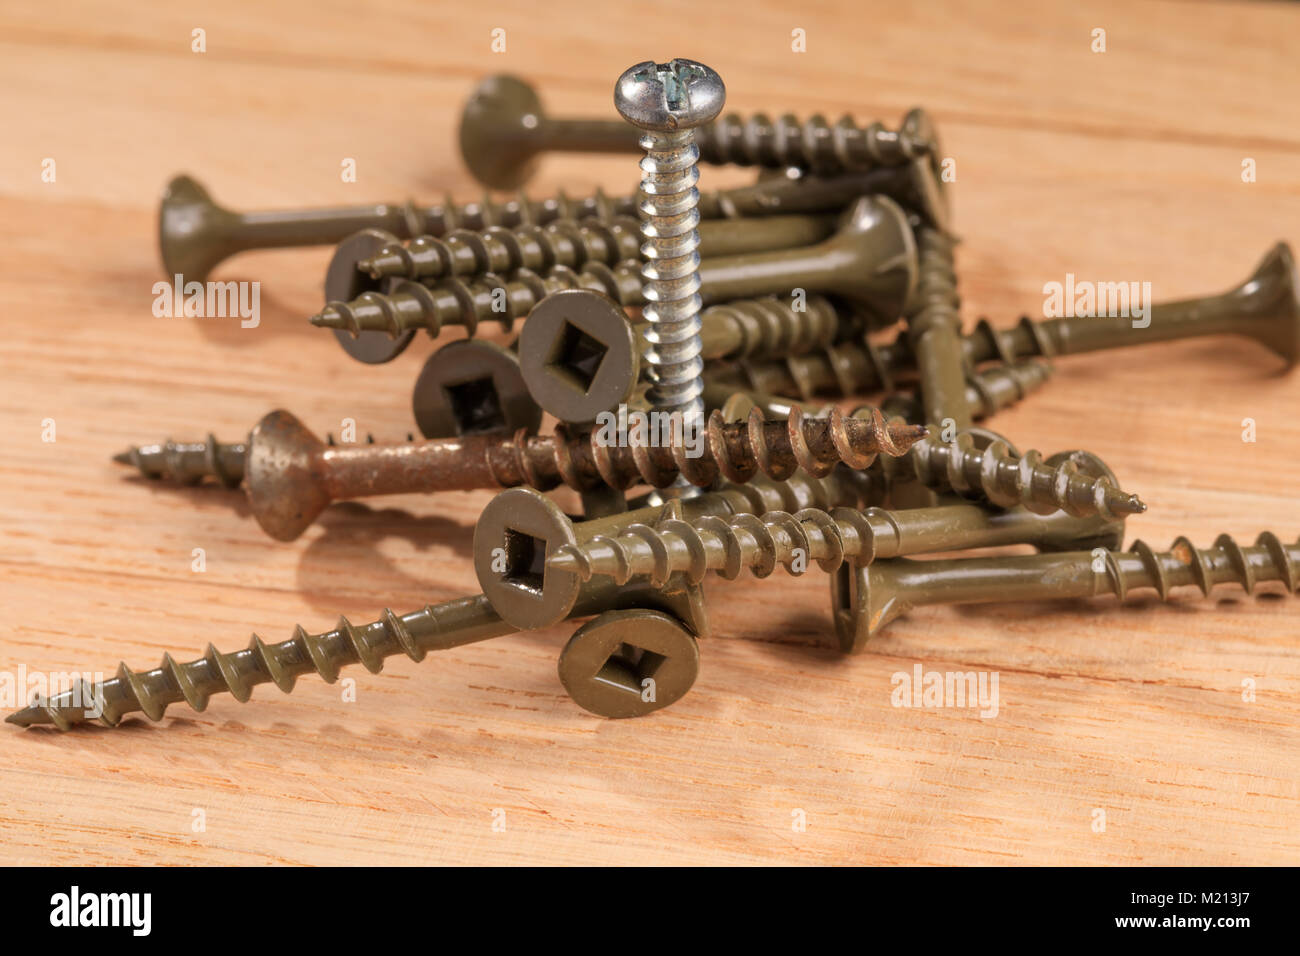 Used screws for construction projects on a wooden board background. Screw that is installed up in place, along with other used screws. Stock Photo